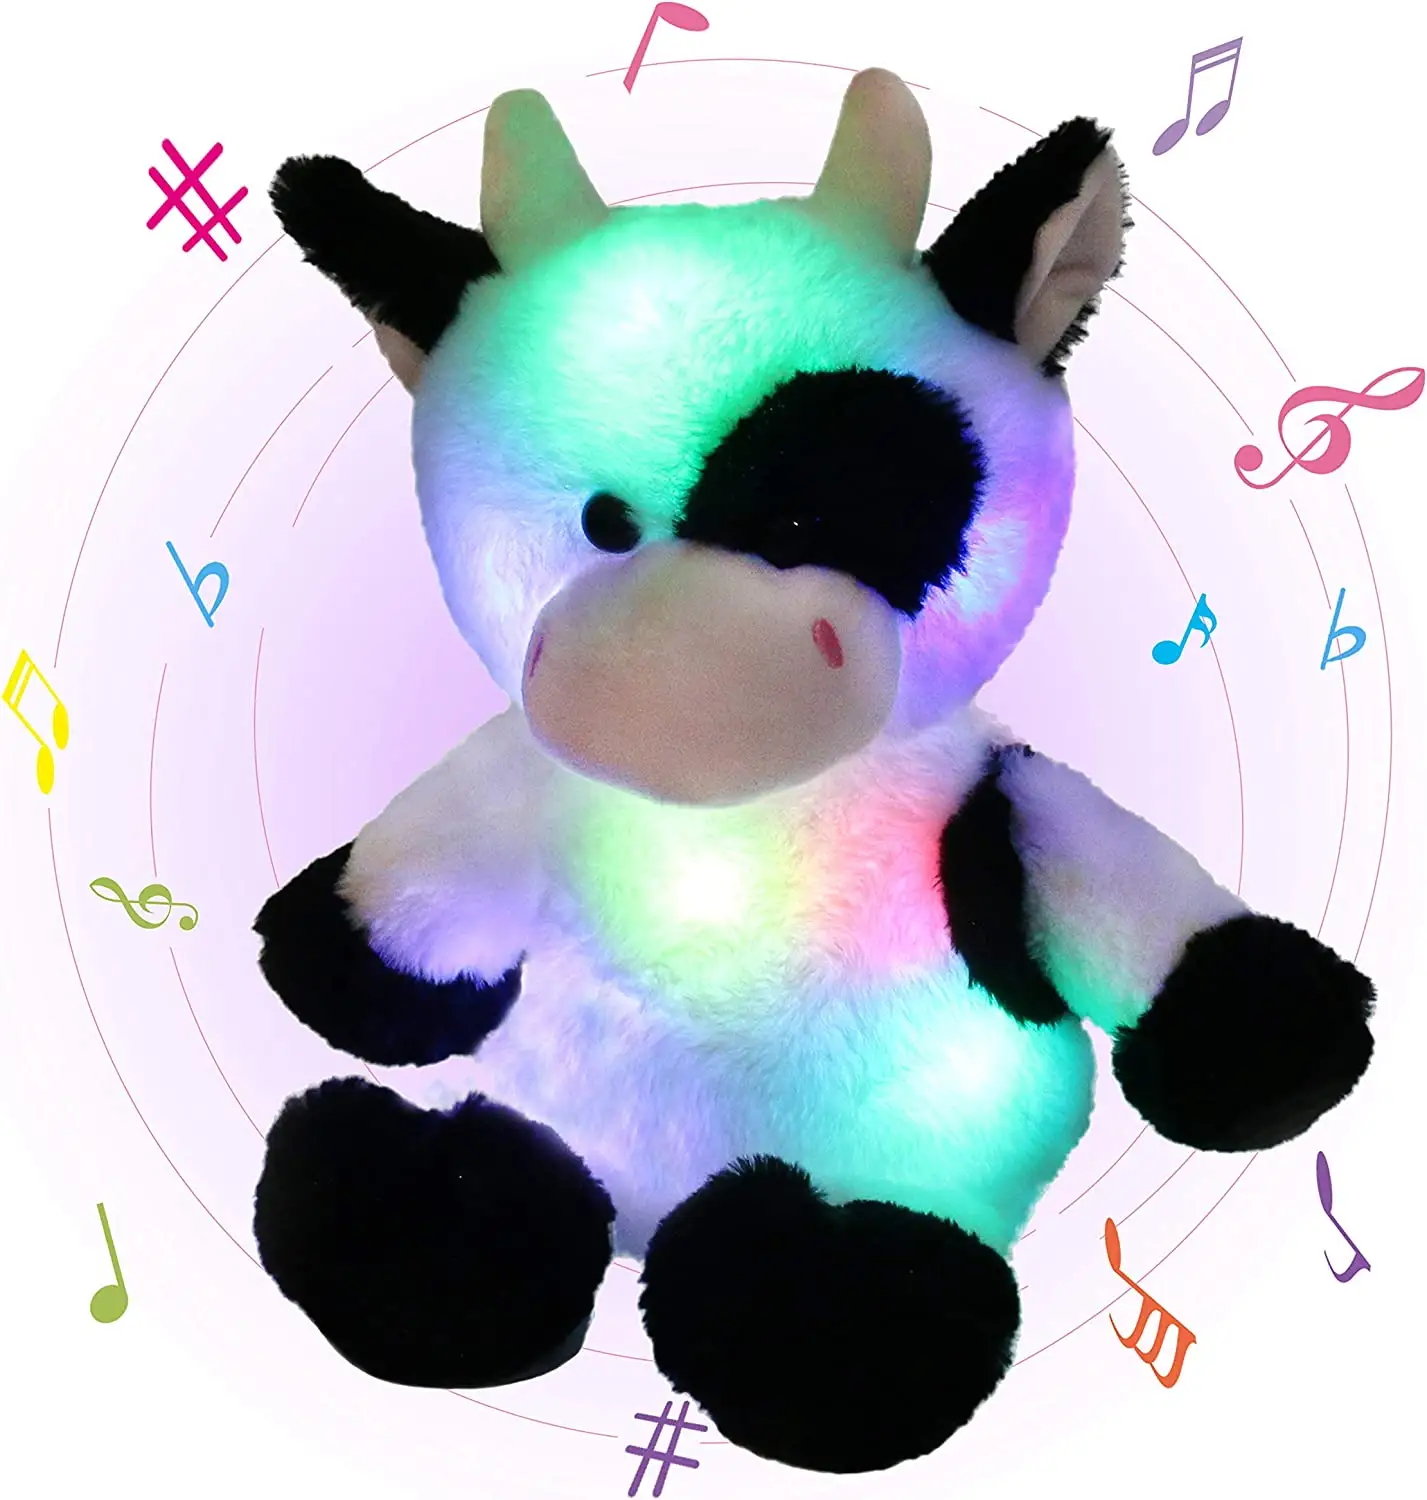 Light up Music Cow Stuffed Animal Farm Animal Glowing Singing Soft Plush Toy with Lullaby Songs LED Night Lights for kids